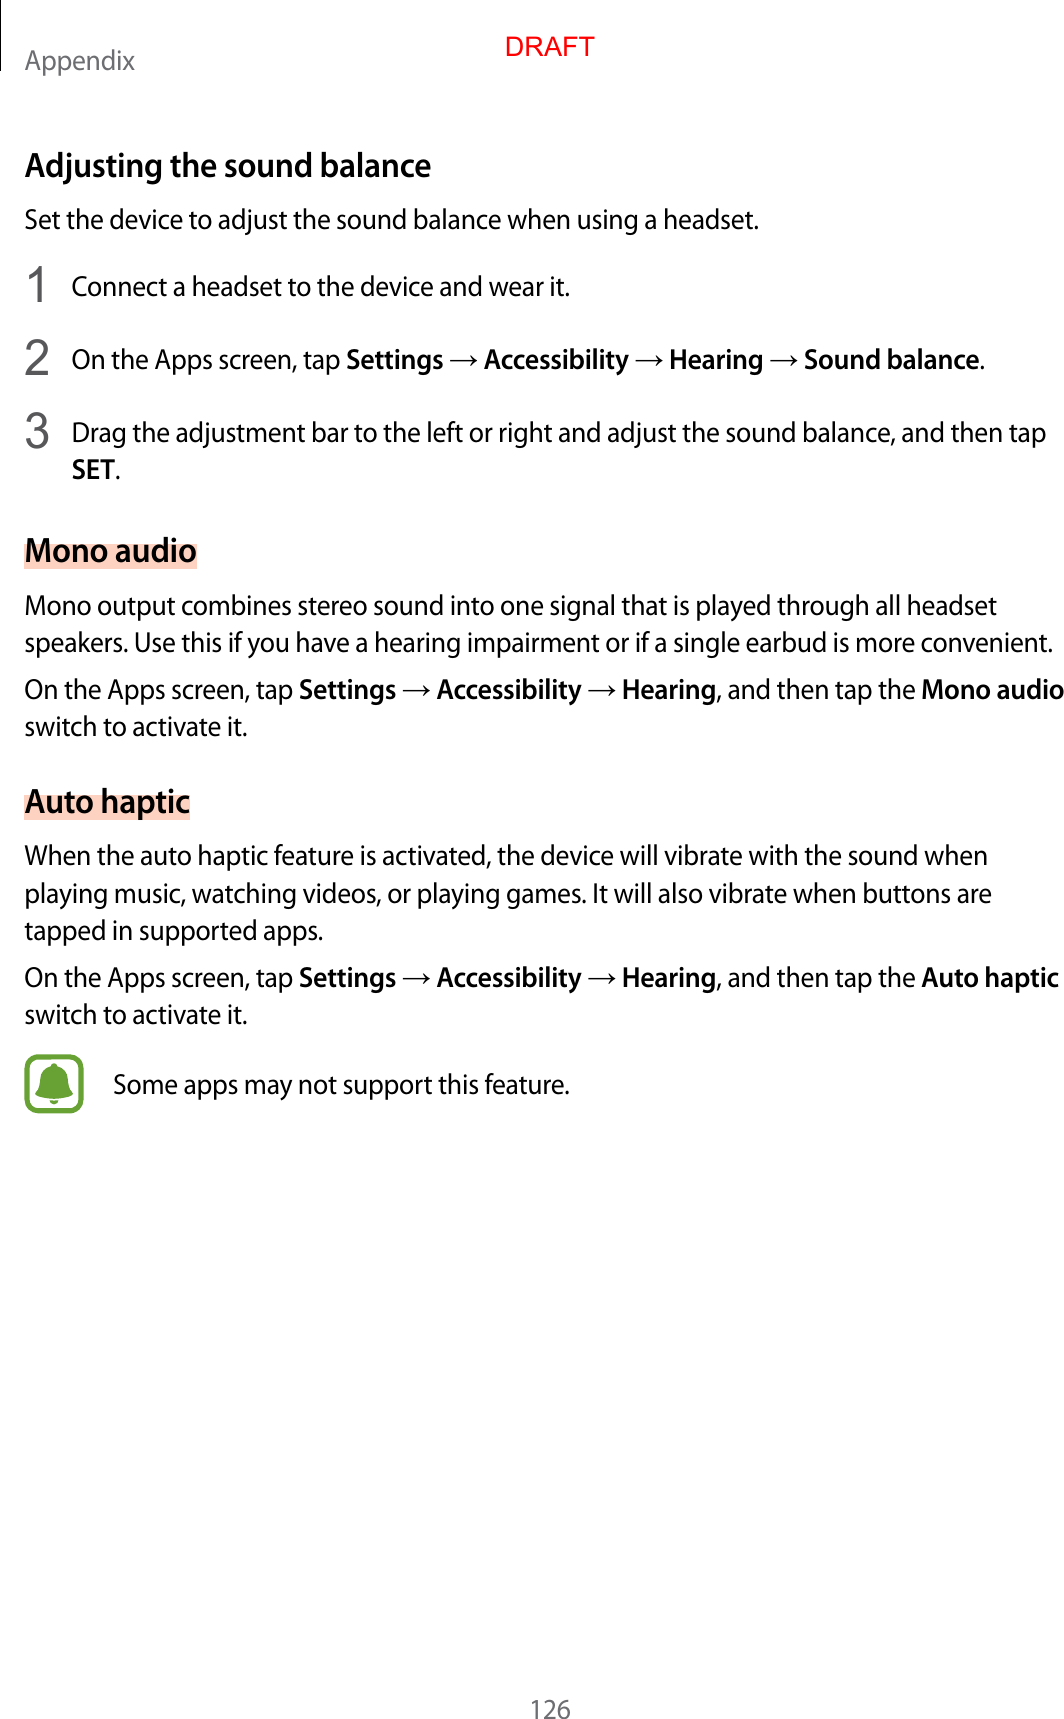 Appendix126Adjusting the sound balanc eSet the device to adjust the sound balance when using a headset.1  Connect a headset to the device and w ear it.2  On the Apps screen, tap Settings  Accessibility  Hearing  Sound balance.3  Drag the adjustment bar to the left or right and adjust the sound balance , and then tapSET.Mono audioMono output combines stereo sound in to one sig nal that is pla y ed thr ough all headset speakers. Use this if y ou ha v e a hearing impairment or if a single earbud is more c on v enien t.On the Apps screen, tap Settings  Accessibility  Hearing, and then tap the Mono audio switch to activate it.Aut o hapticWhen the auto haptic f ea tur e is activated , the device will vibr at e with the sound when playing music , wat ching videos , or pla ying games . It will also vibrate when buttons ar e tapped in supported apps.On the Apps screen, tap Settings  Accessibility  Hearing, and then tap the Aut o haptic switch to activate it.Some apps may not support this fea tur e .DRAFT